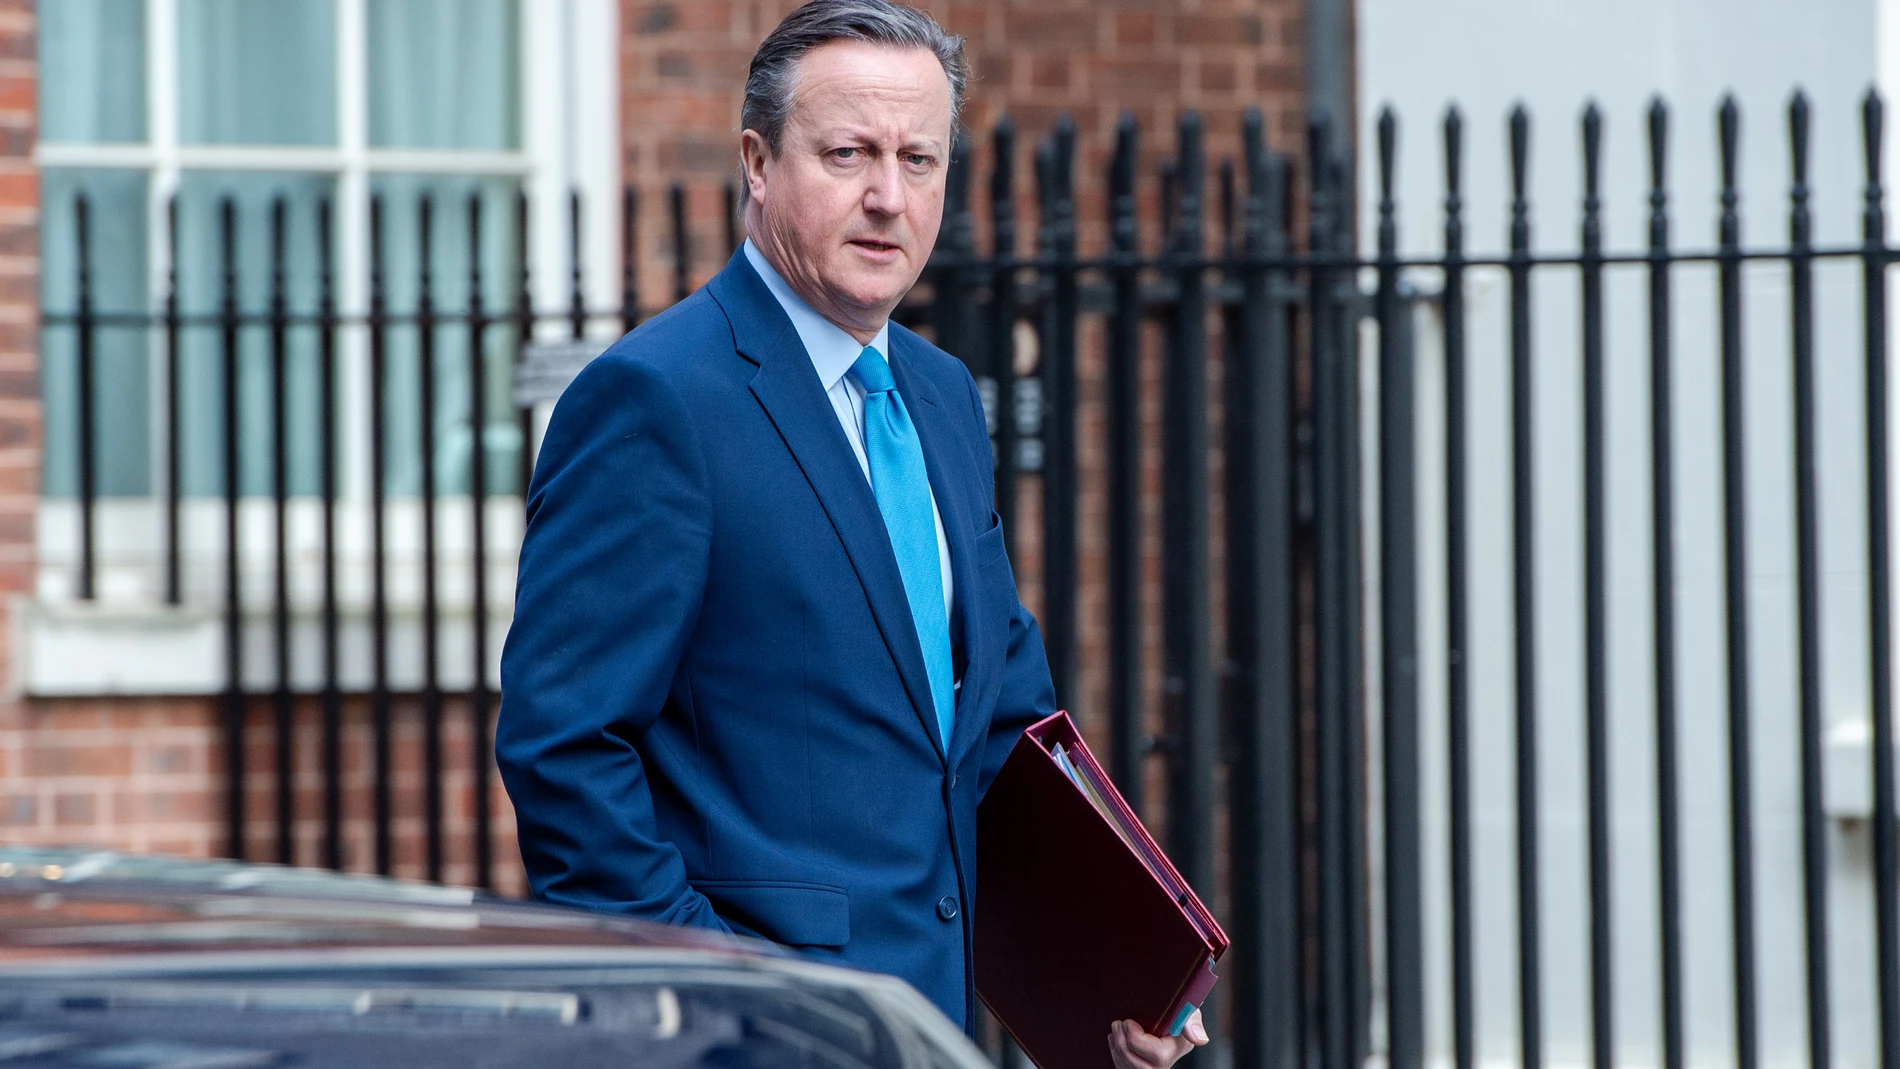 March 26, 2024, London, England, United Kingdom: Foreign Secretary DAVID CAMERON arrives at Downing Street for a Cabinet Meeting. 26/03/2024